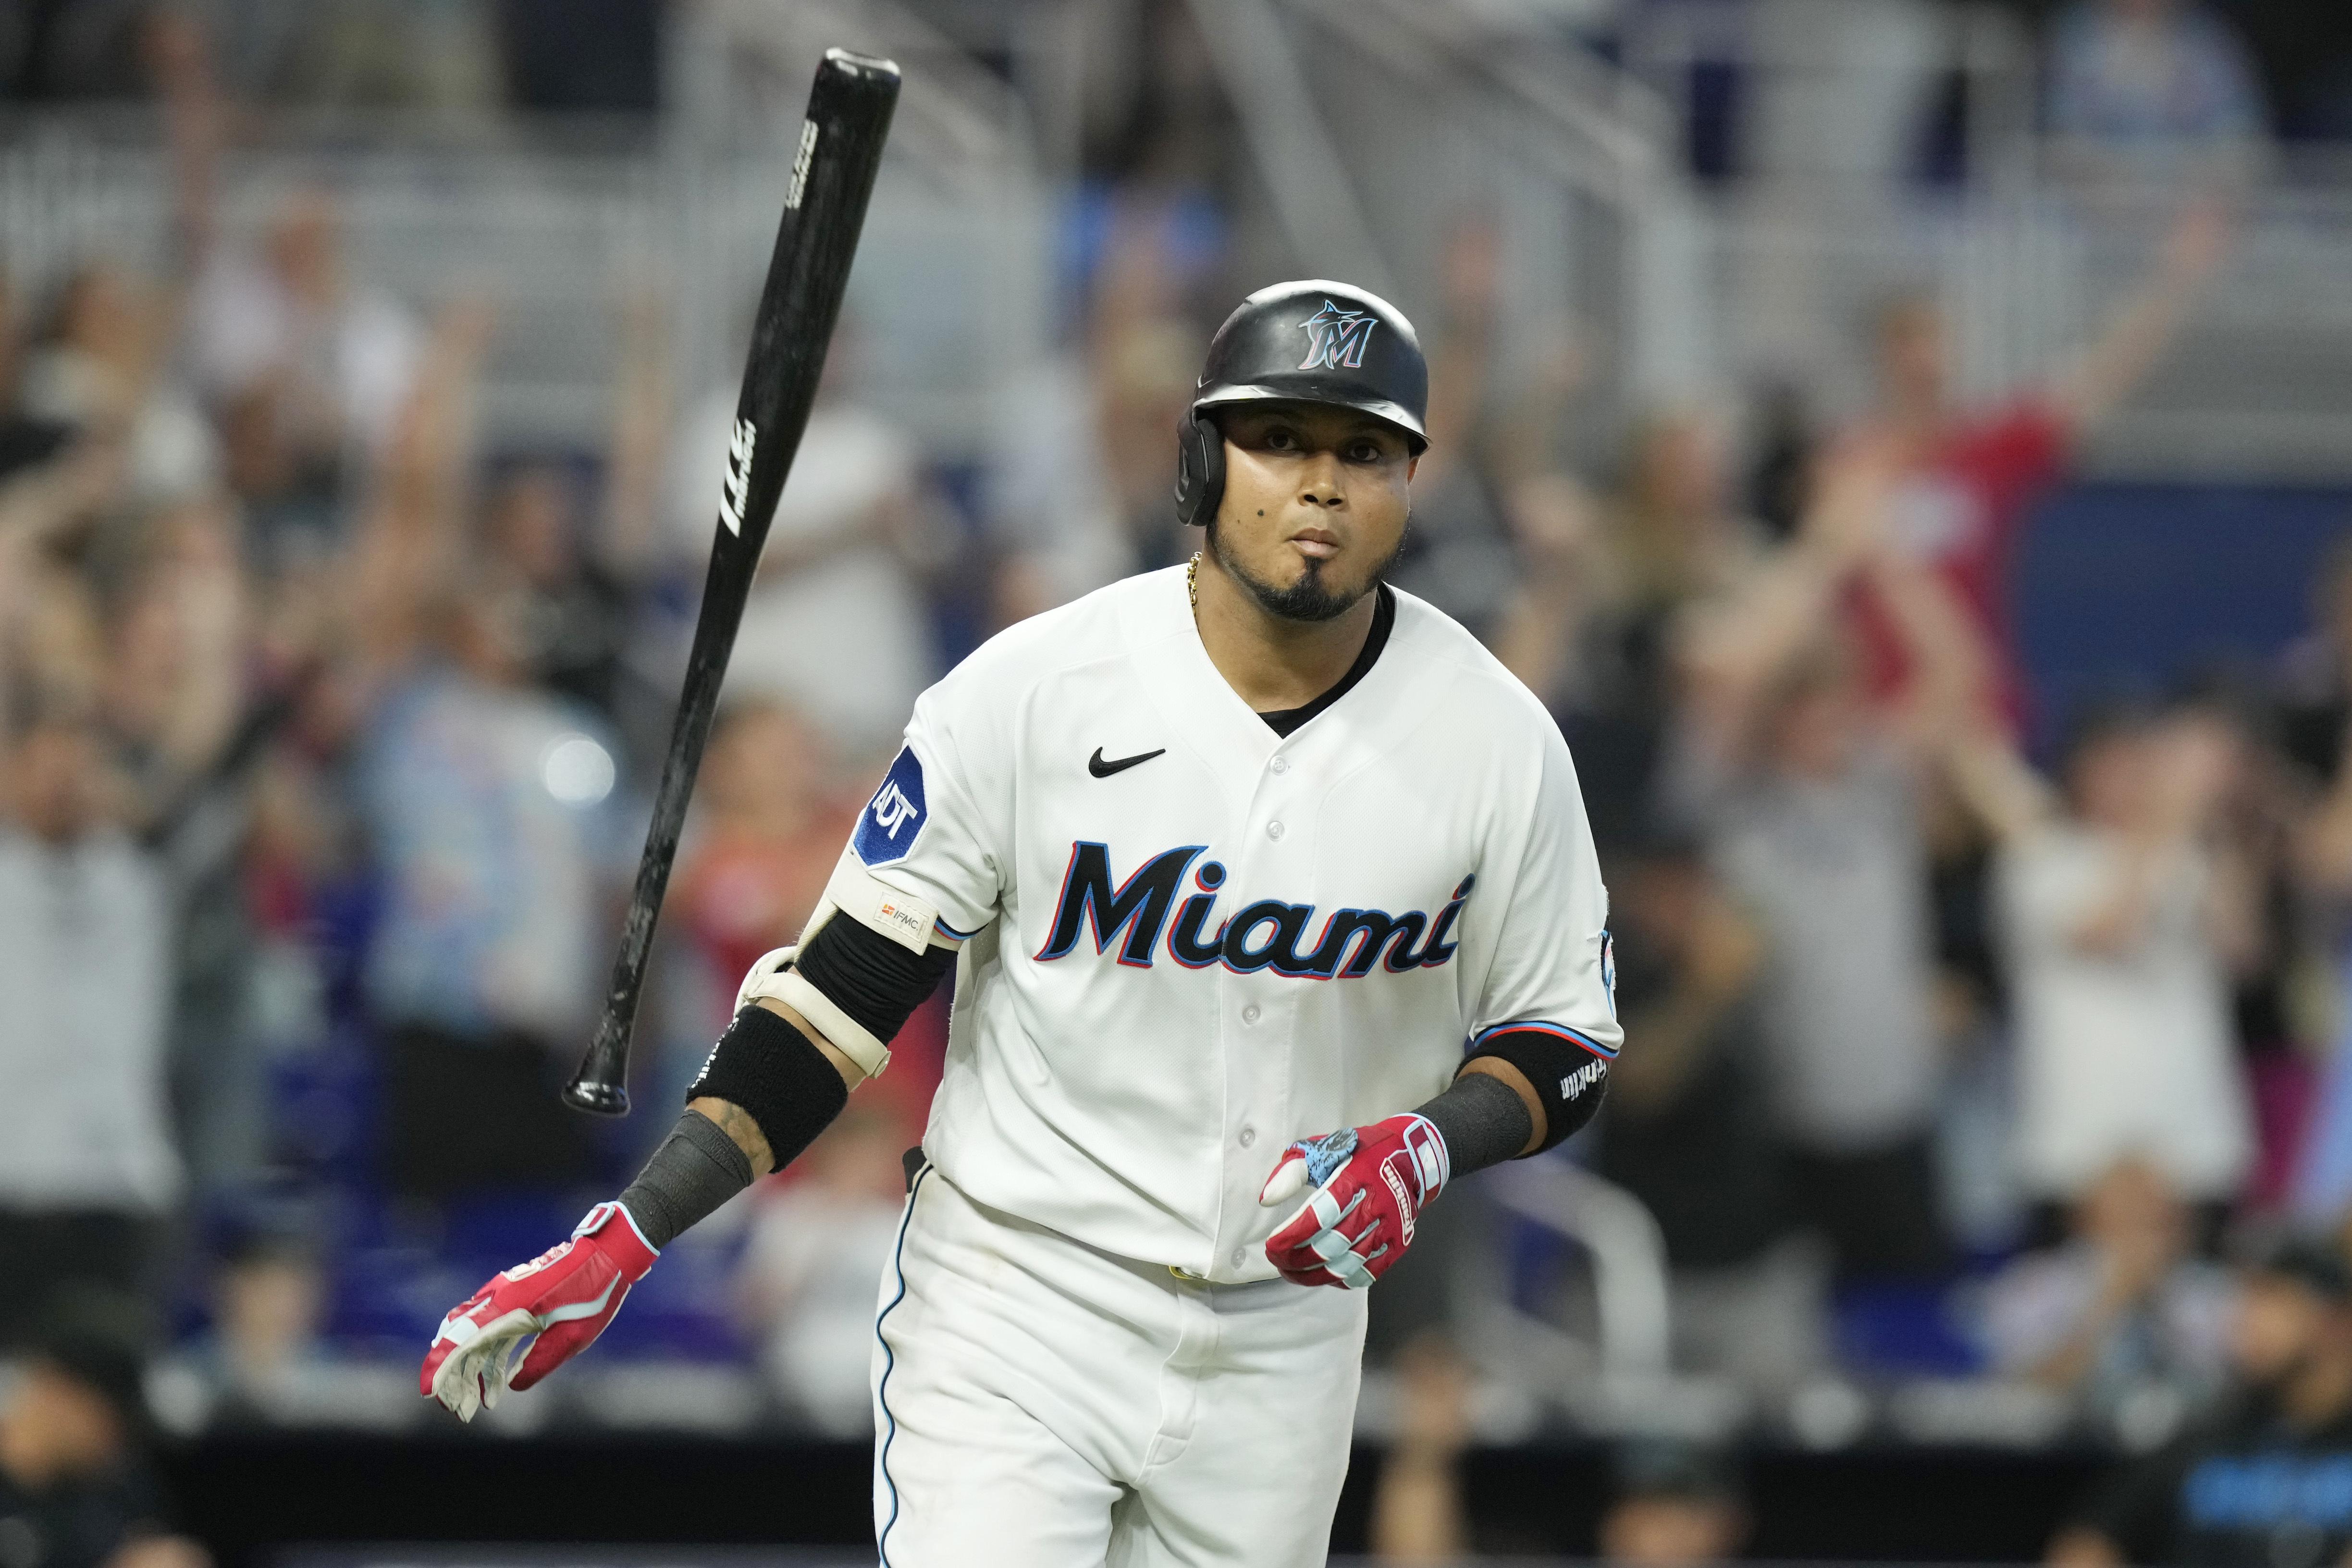 Luis Arraez's RBI single helps Miami Marlins end 8-game slide with